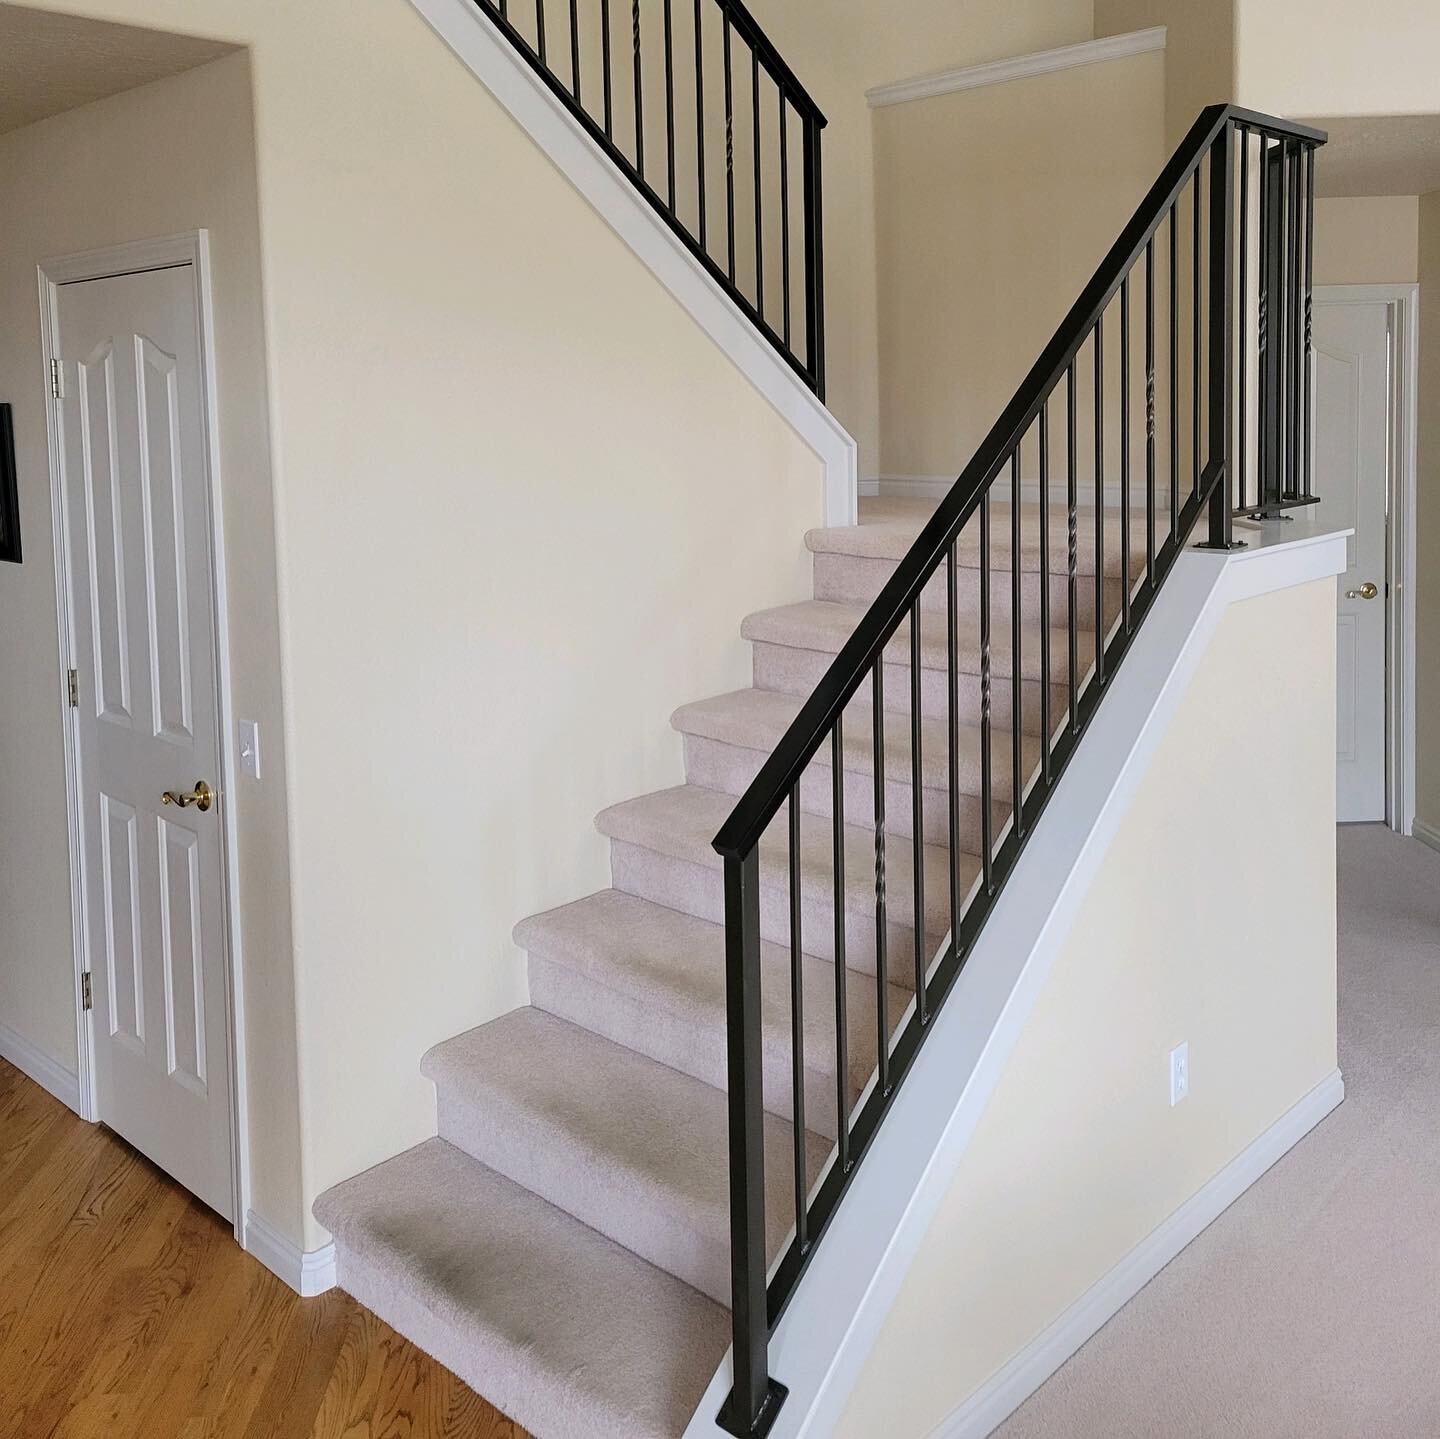 Here&rsquo;s what we refer to as the &ldquo;vertical style&rdquo; interior iron railing. Except this one has a custom twist baluster every so 3rd baluster. 

Interested in the process behind it all? 🤔

We come out and make a template that goes back 